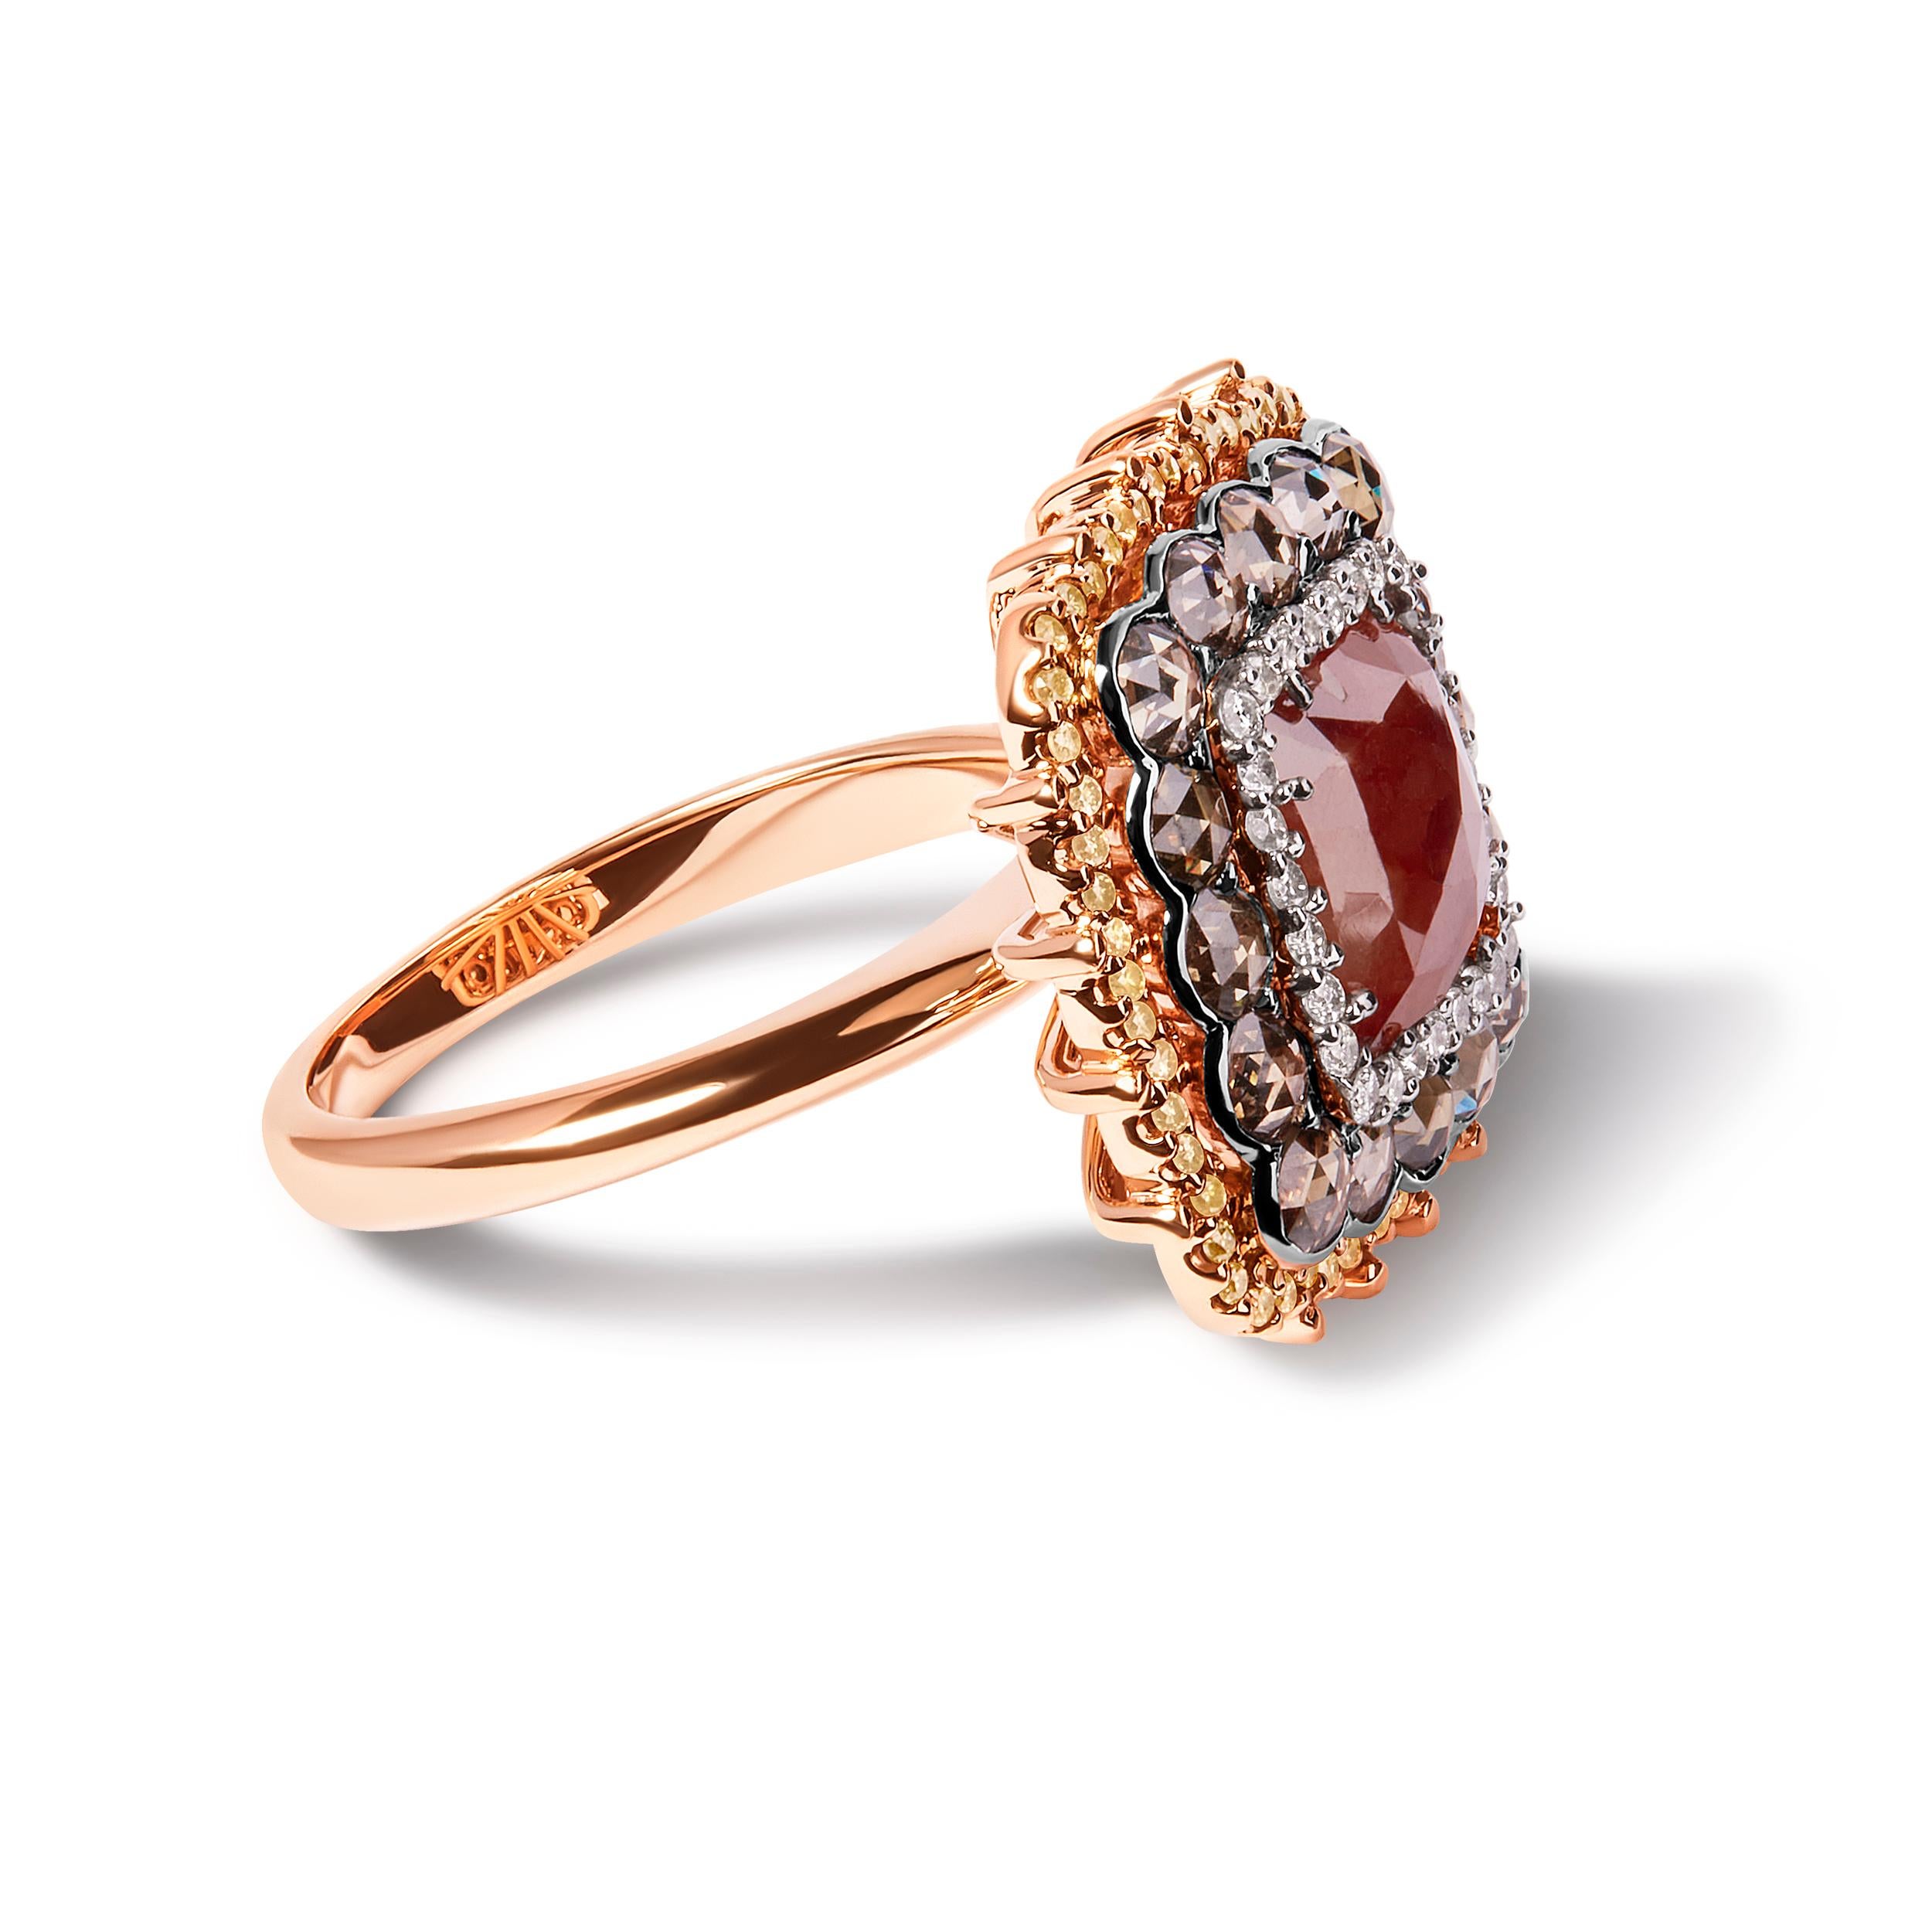 Introducing a captivating masterpiece that exudes elegance and sophistication. Crafted in enchanting 14K rose gold, this extraordinary cocktail ring is a testament to your impeccable taste. Adorned with a remarkable 4 1/3 carat total weight of fancy